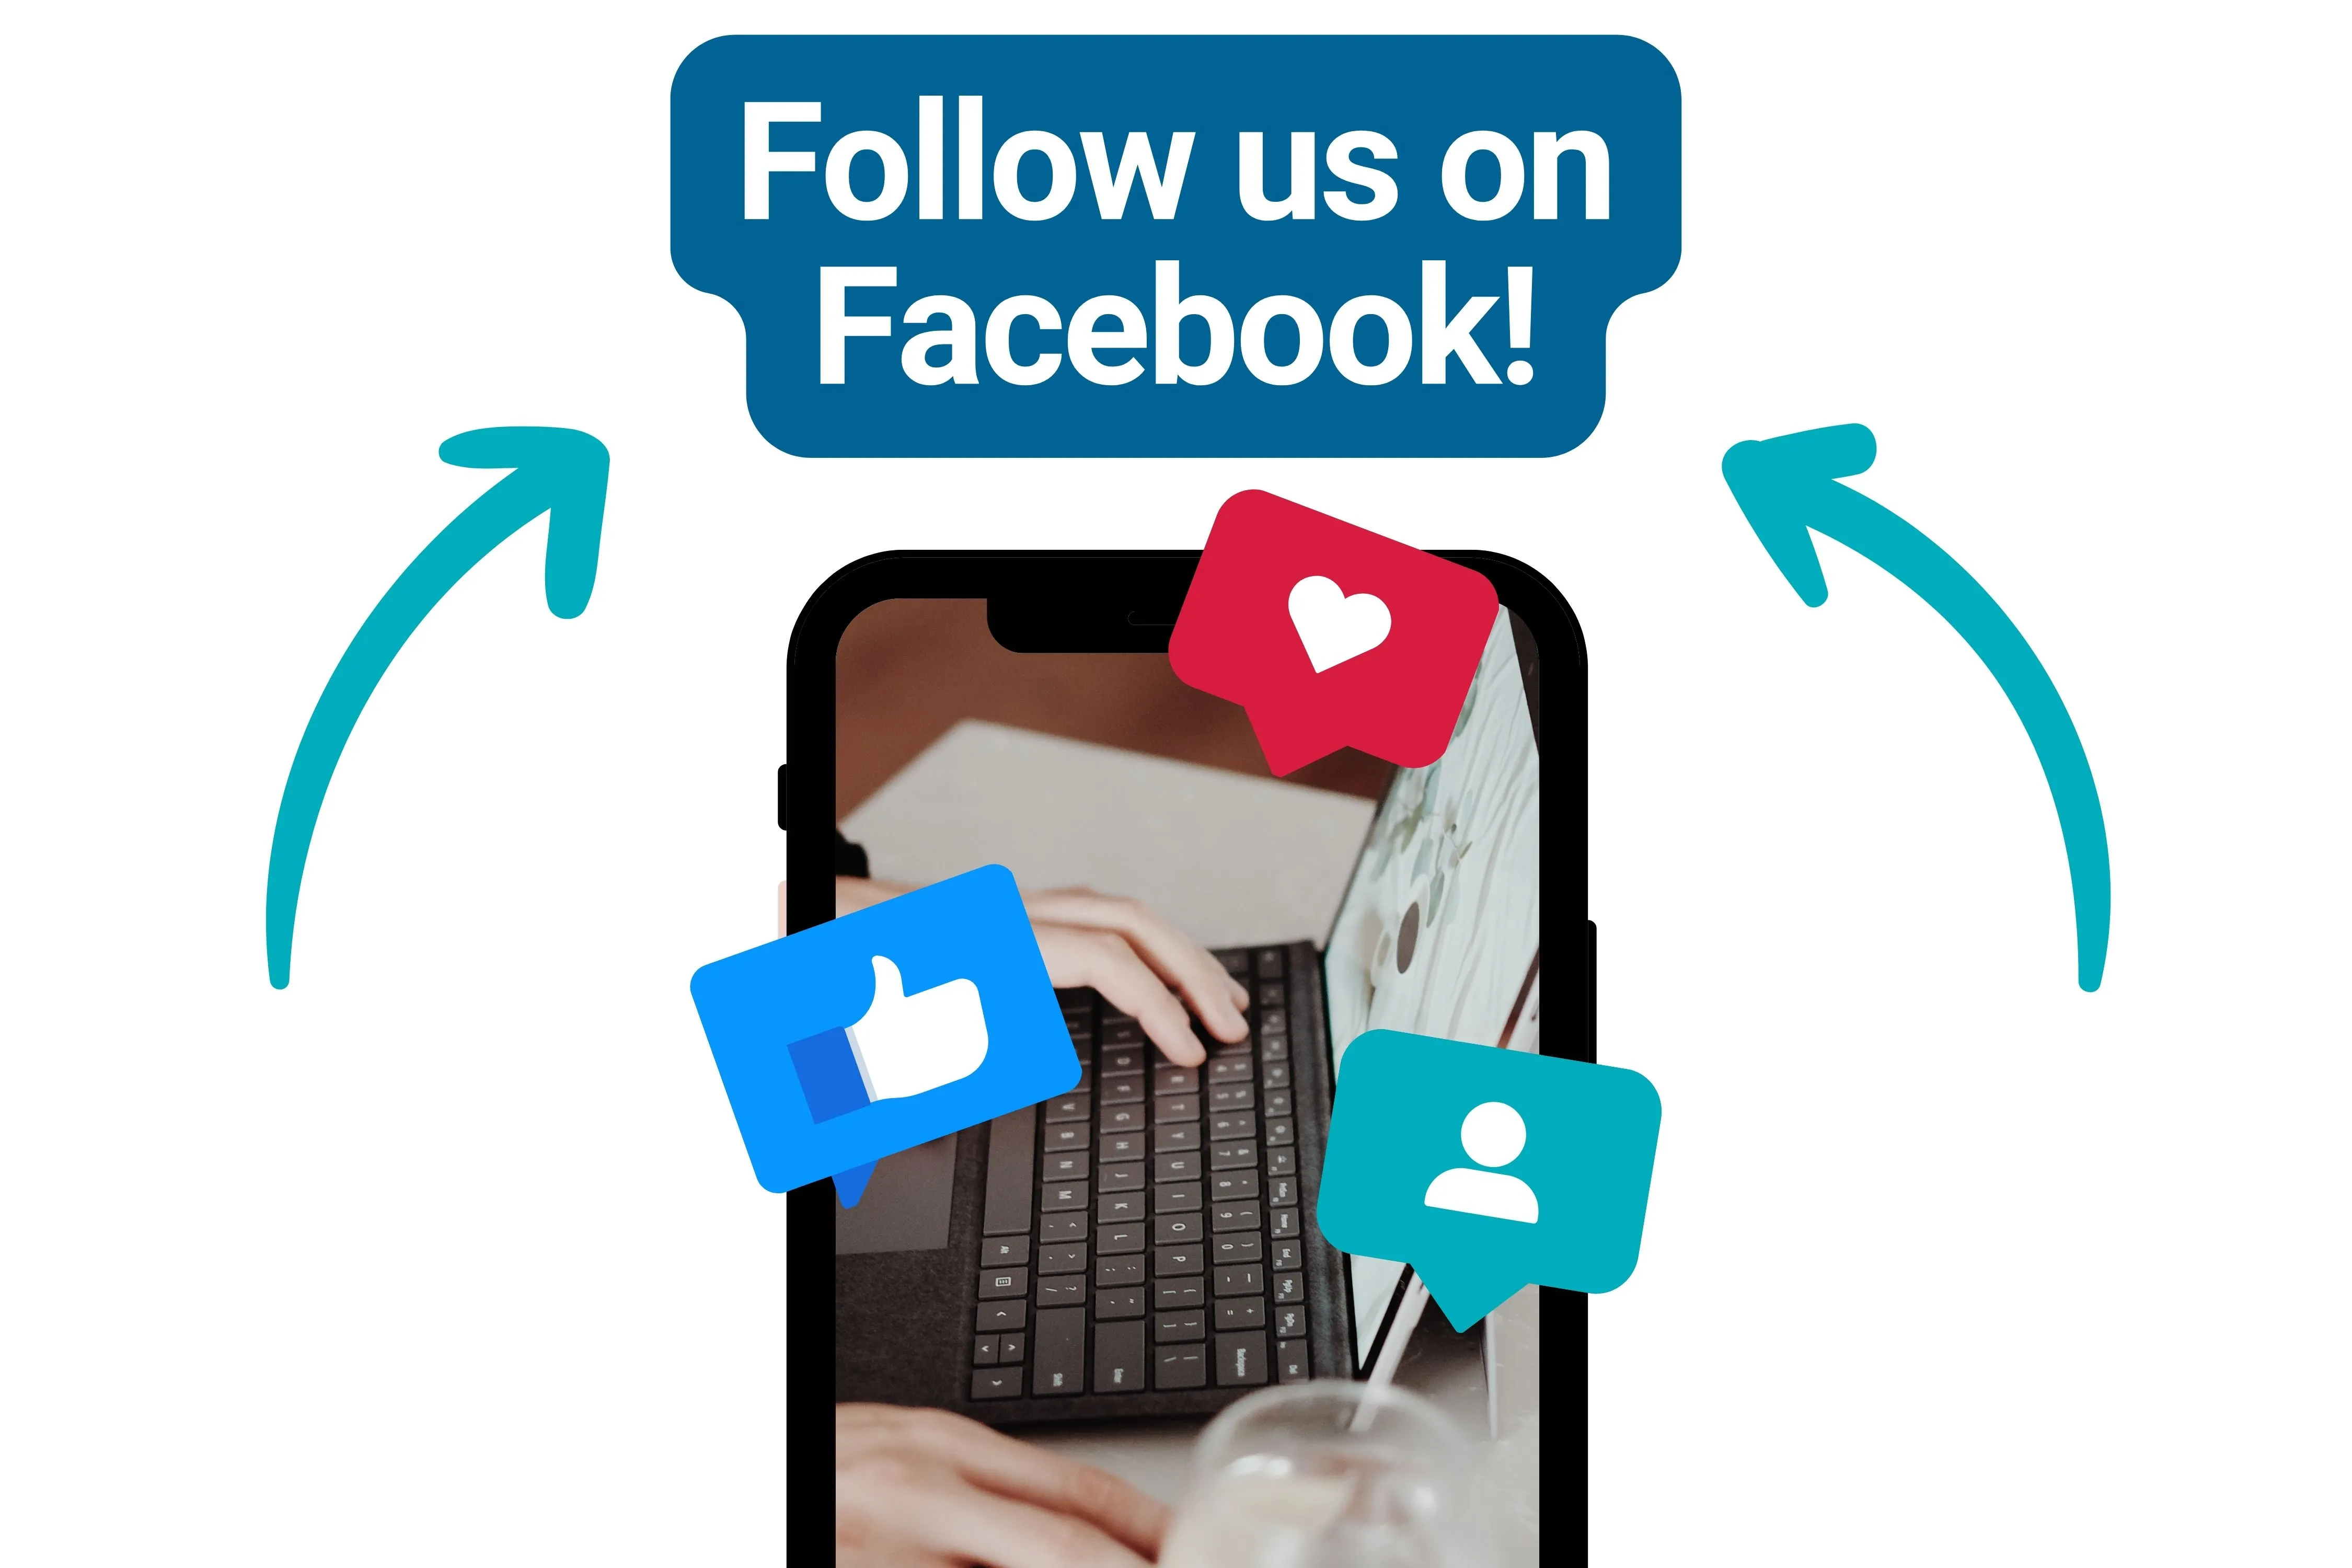 Graphic saying "Follow us on Facebook!" that features a cellphone revealing a person's hands using a laptop 